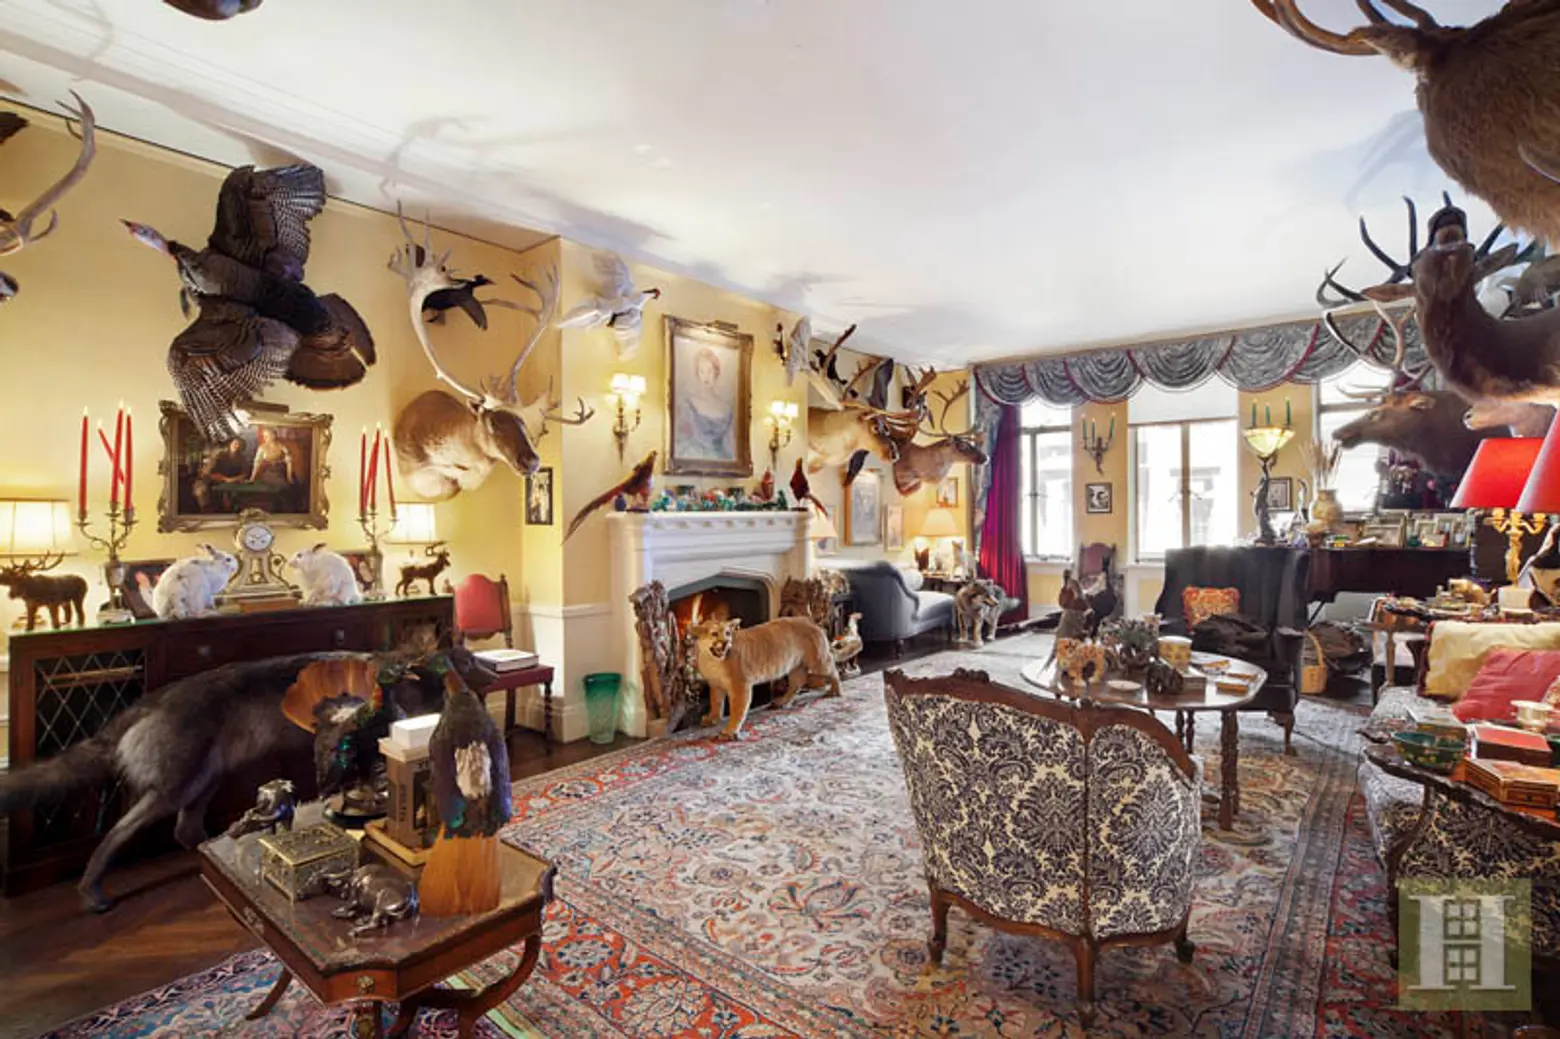 Jaw-Dropping $3.4 Million Central Park West Pad Has Taxidermied Animals Everywhere